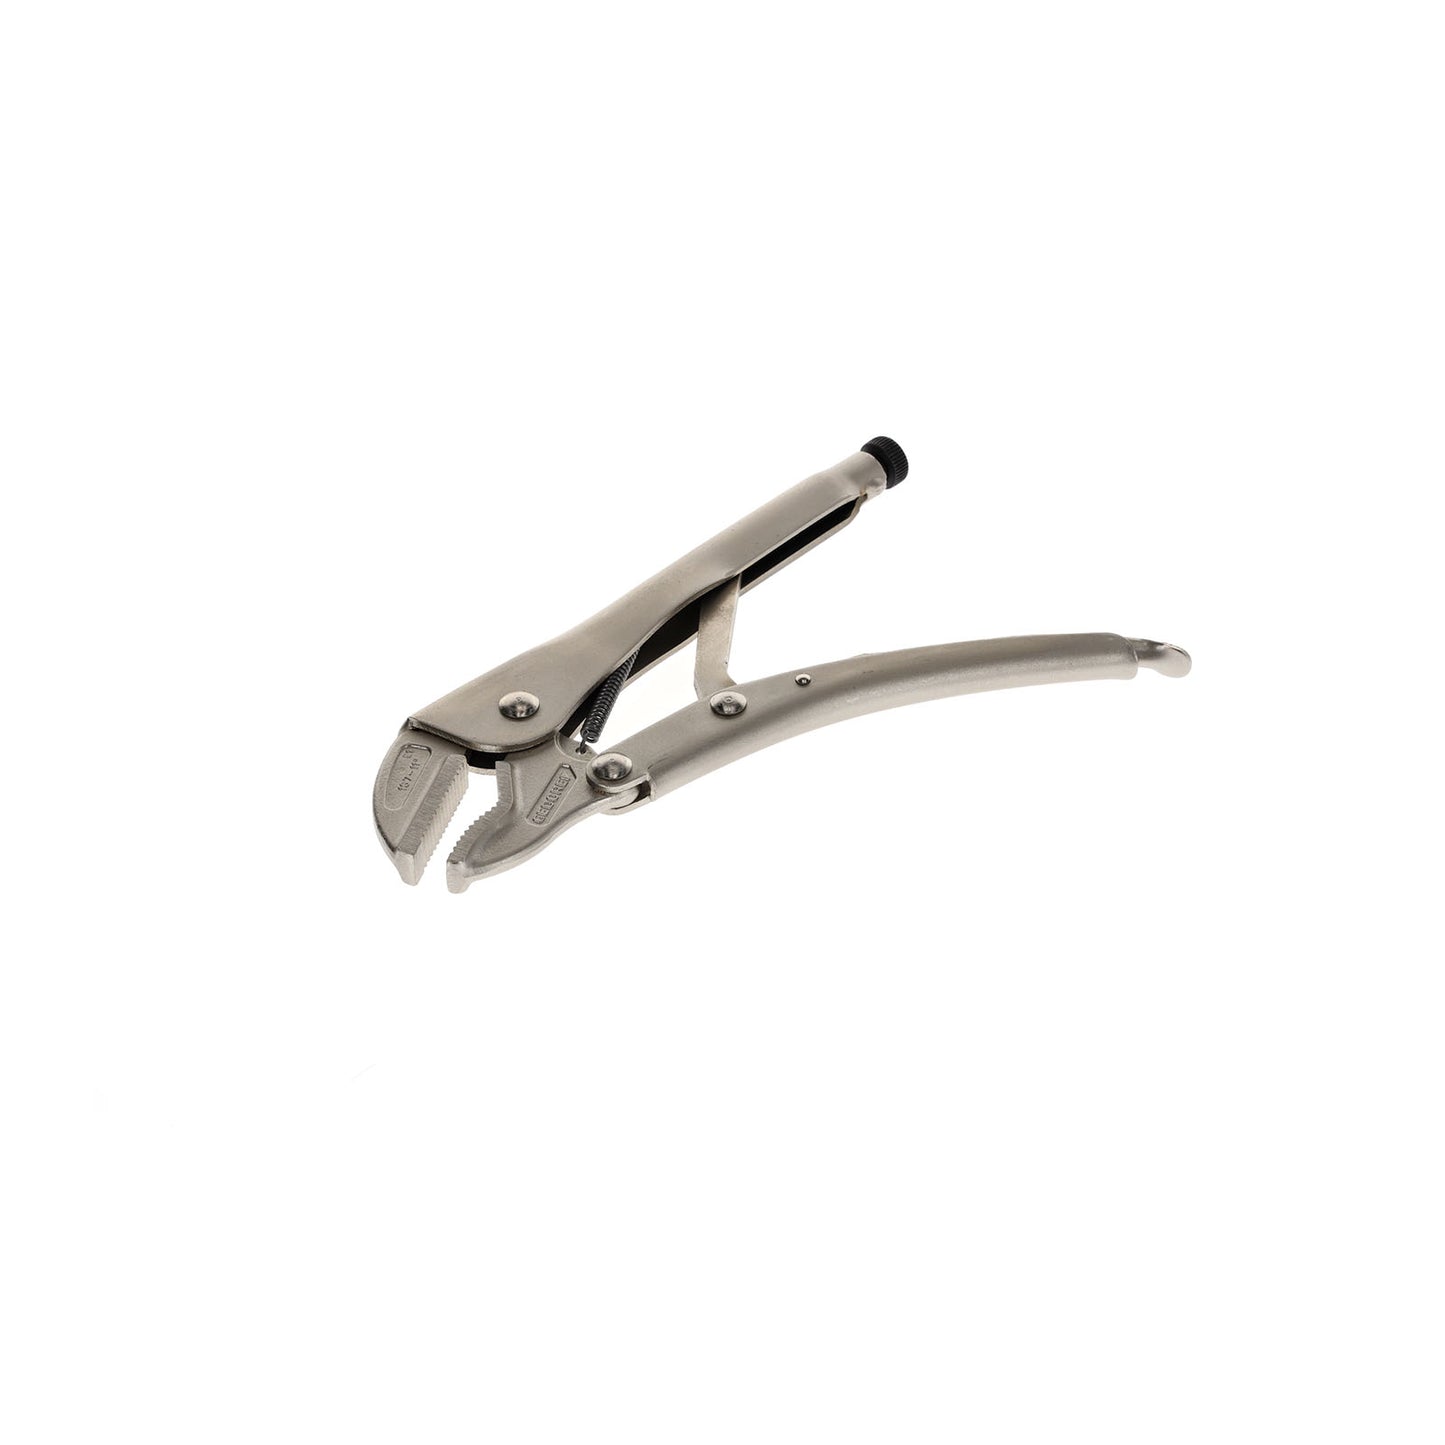 GEDORE 137 11 - Grip Clamp 11" (6407270)